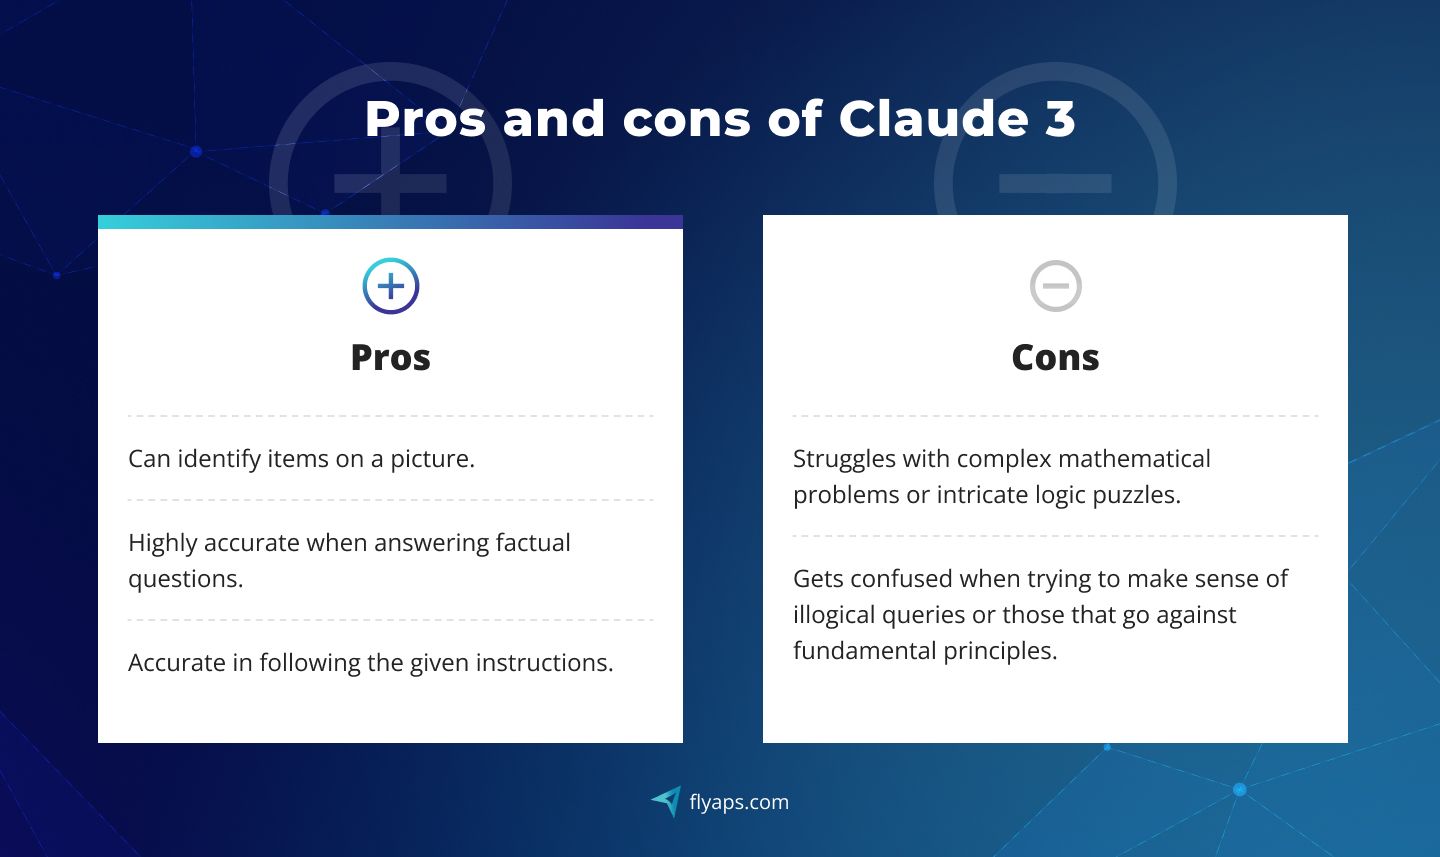 Pros and cons of Claude 3